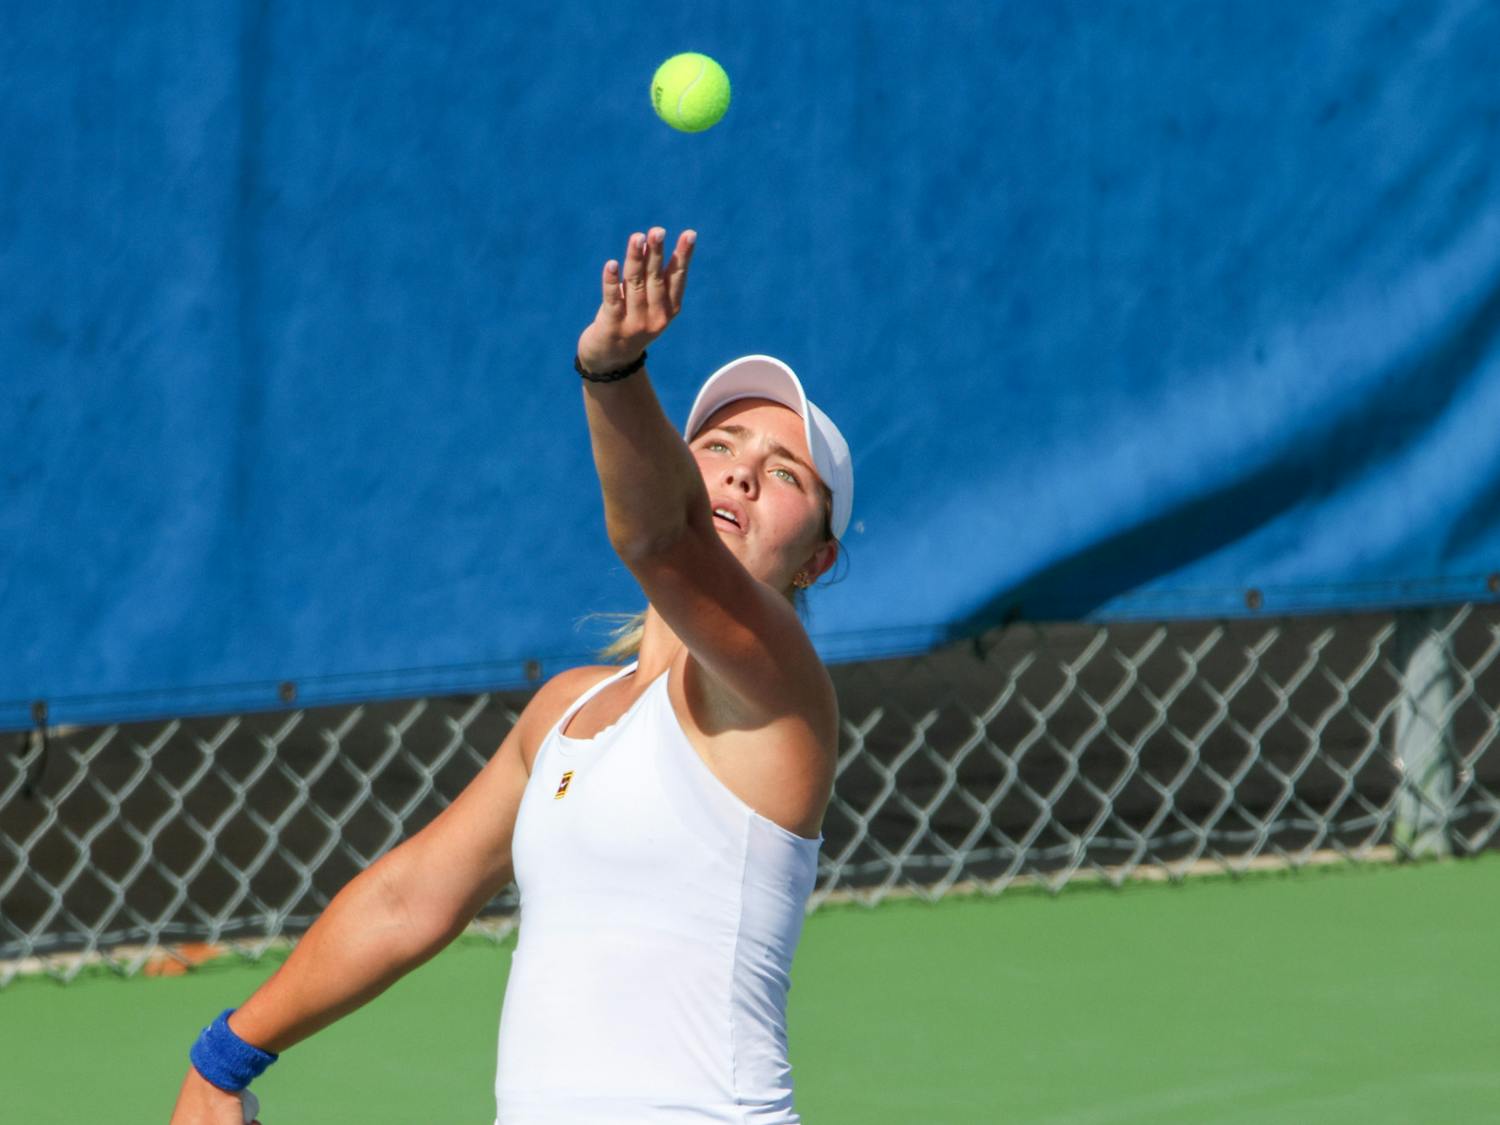 Florida freshman Rachel Gailis serves the ball during the Gators' 4-1 win against the No. 3 Michigan Wolverines Wednesday, March 22, 2023.